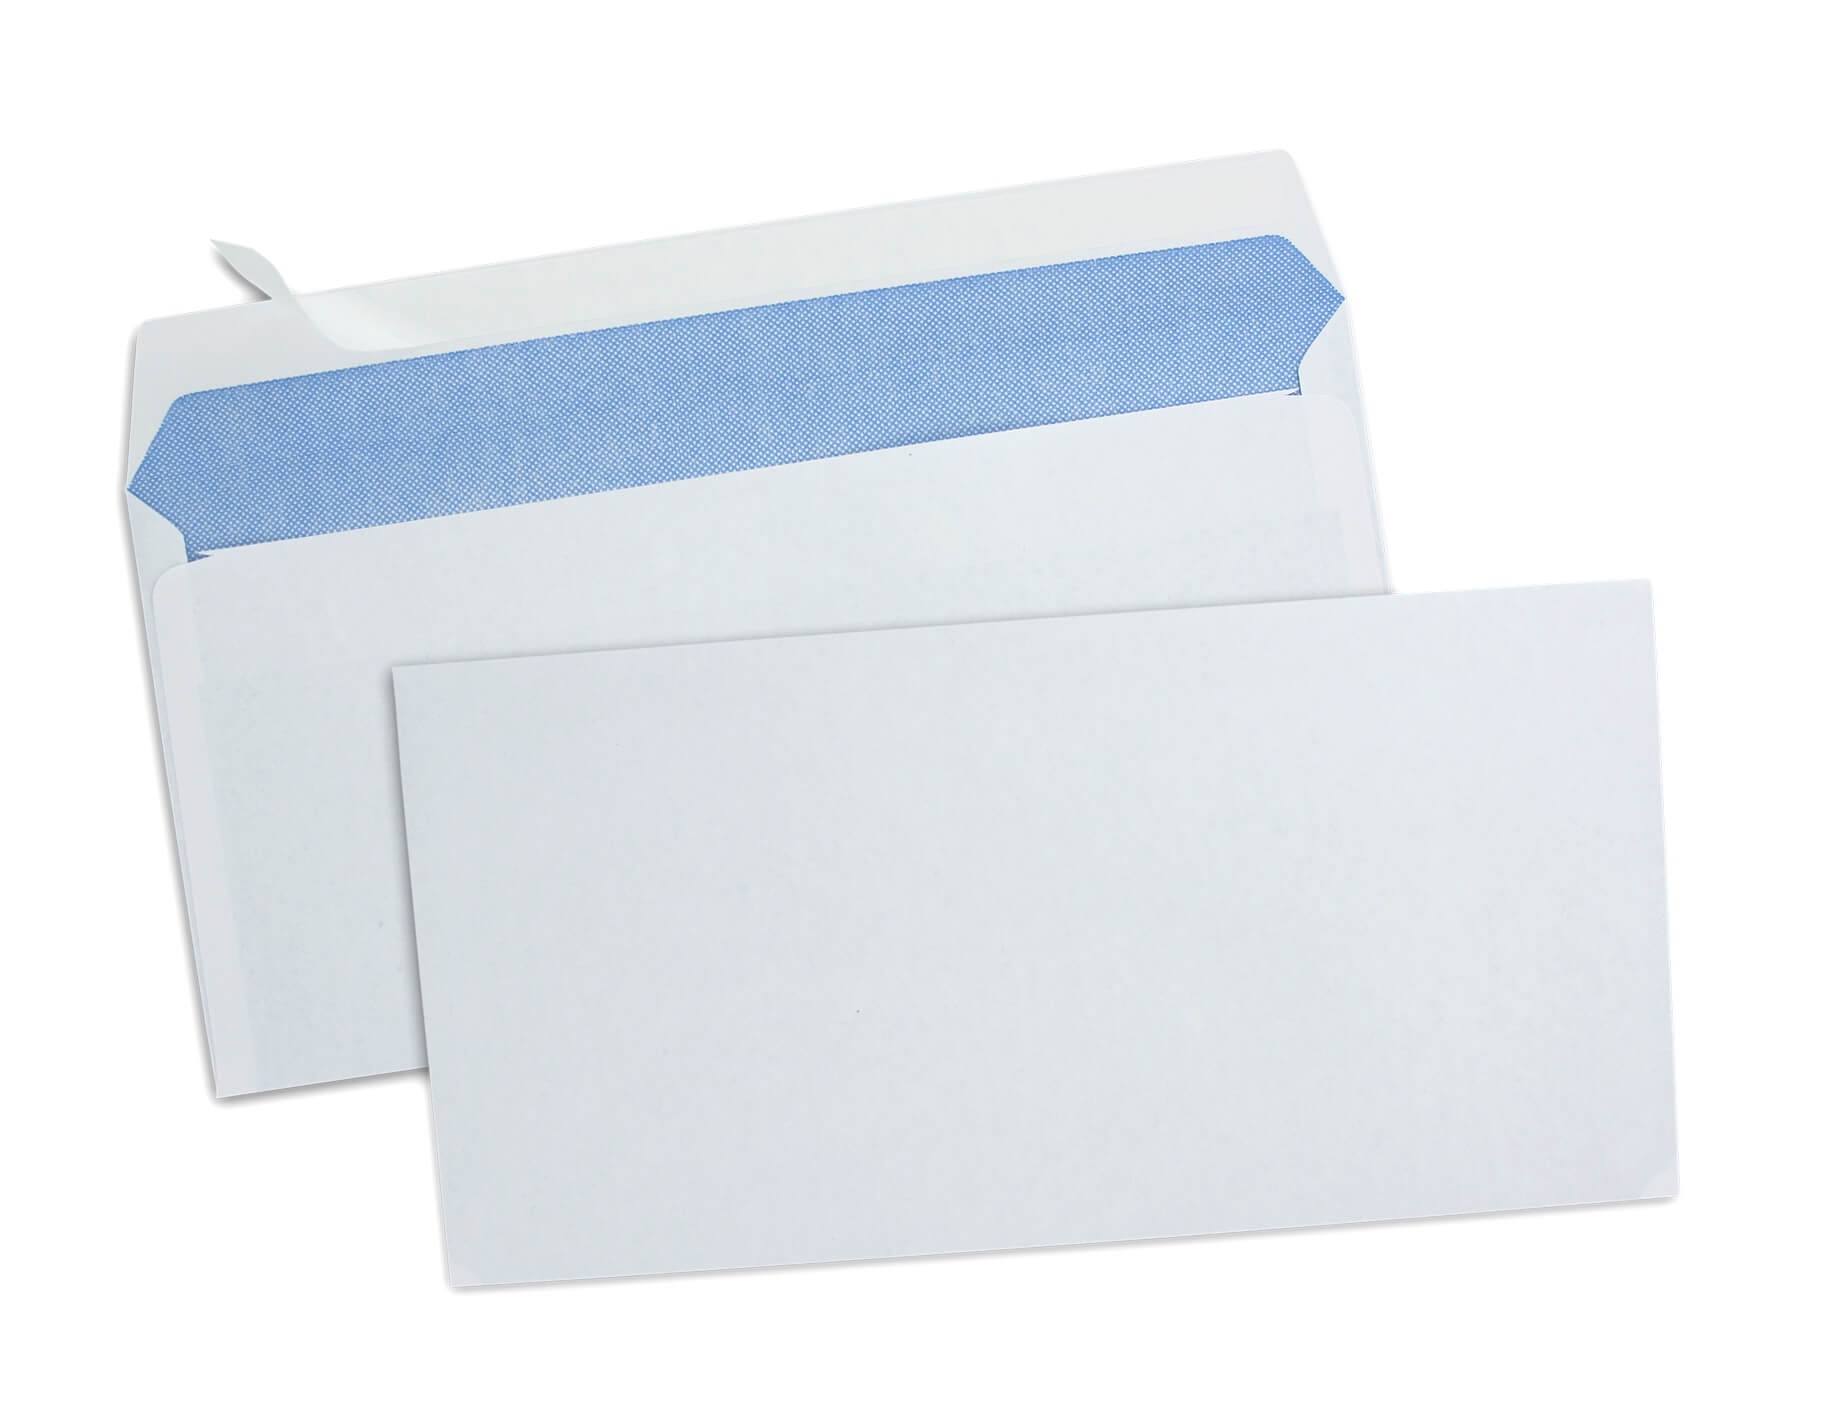 500 ENVELOPPES BLANCHES 80G 110X220 DL AUTOADHESIVES